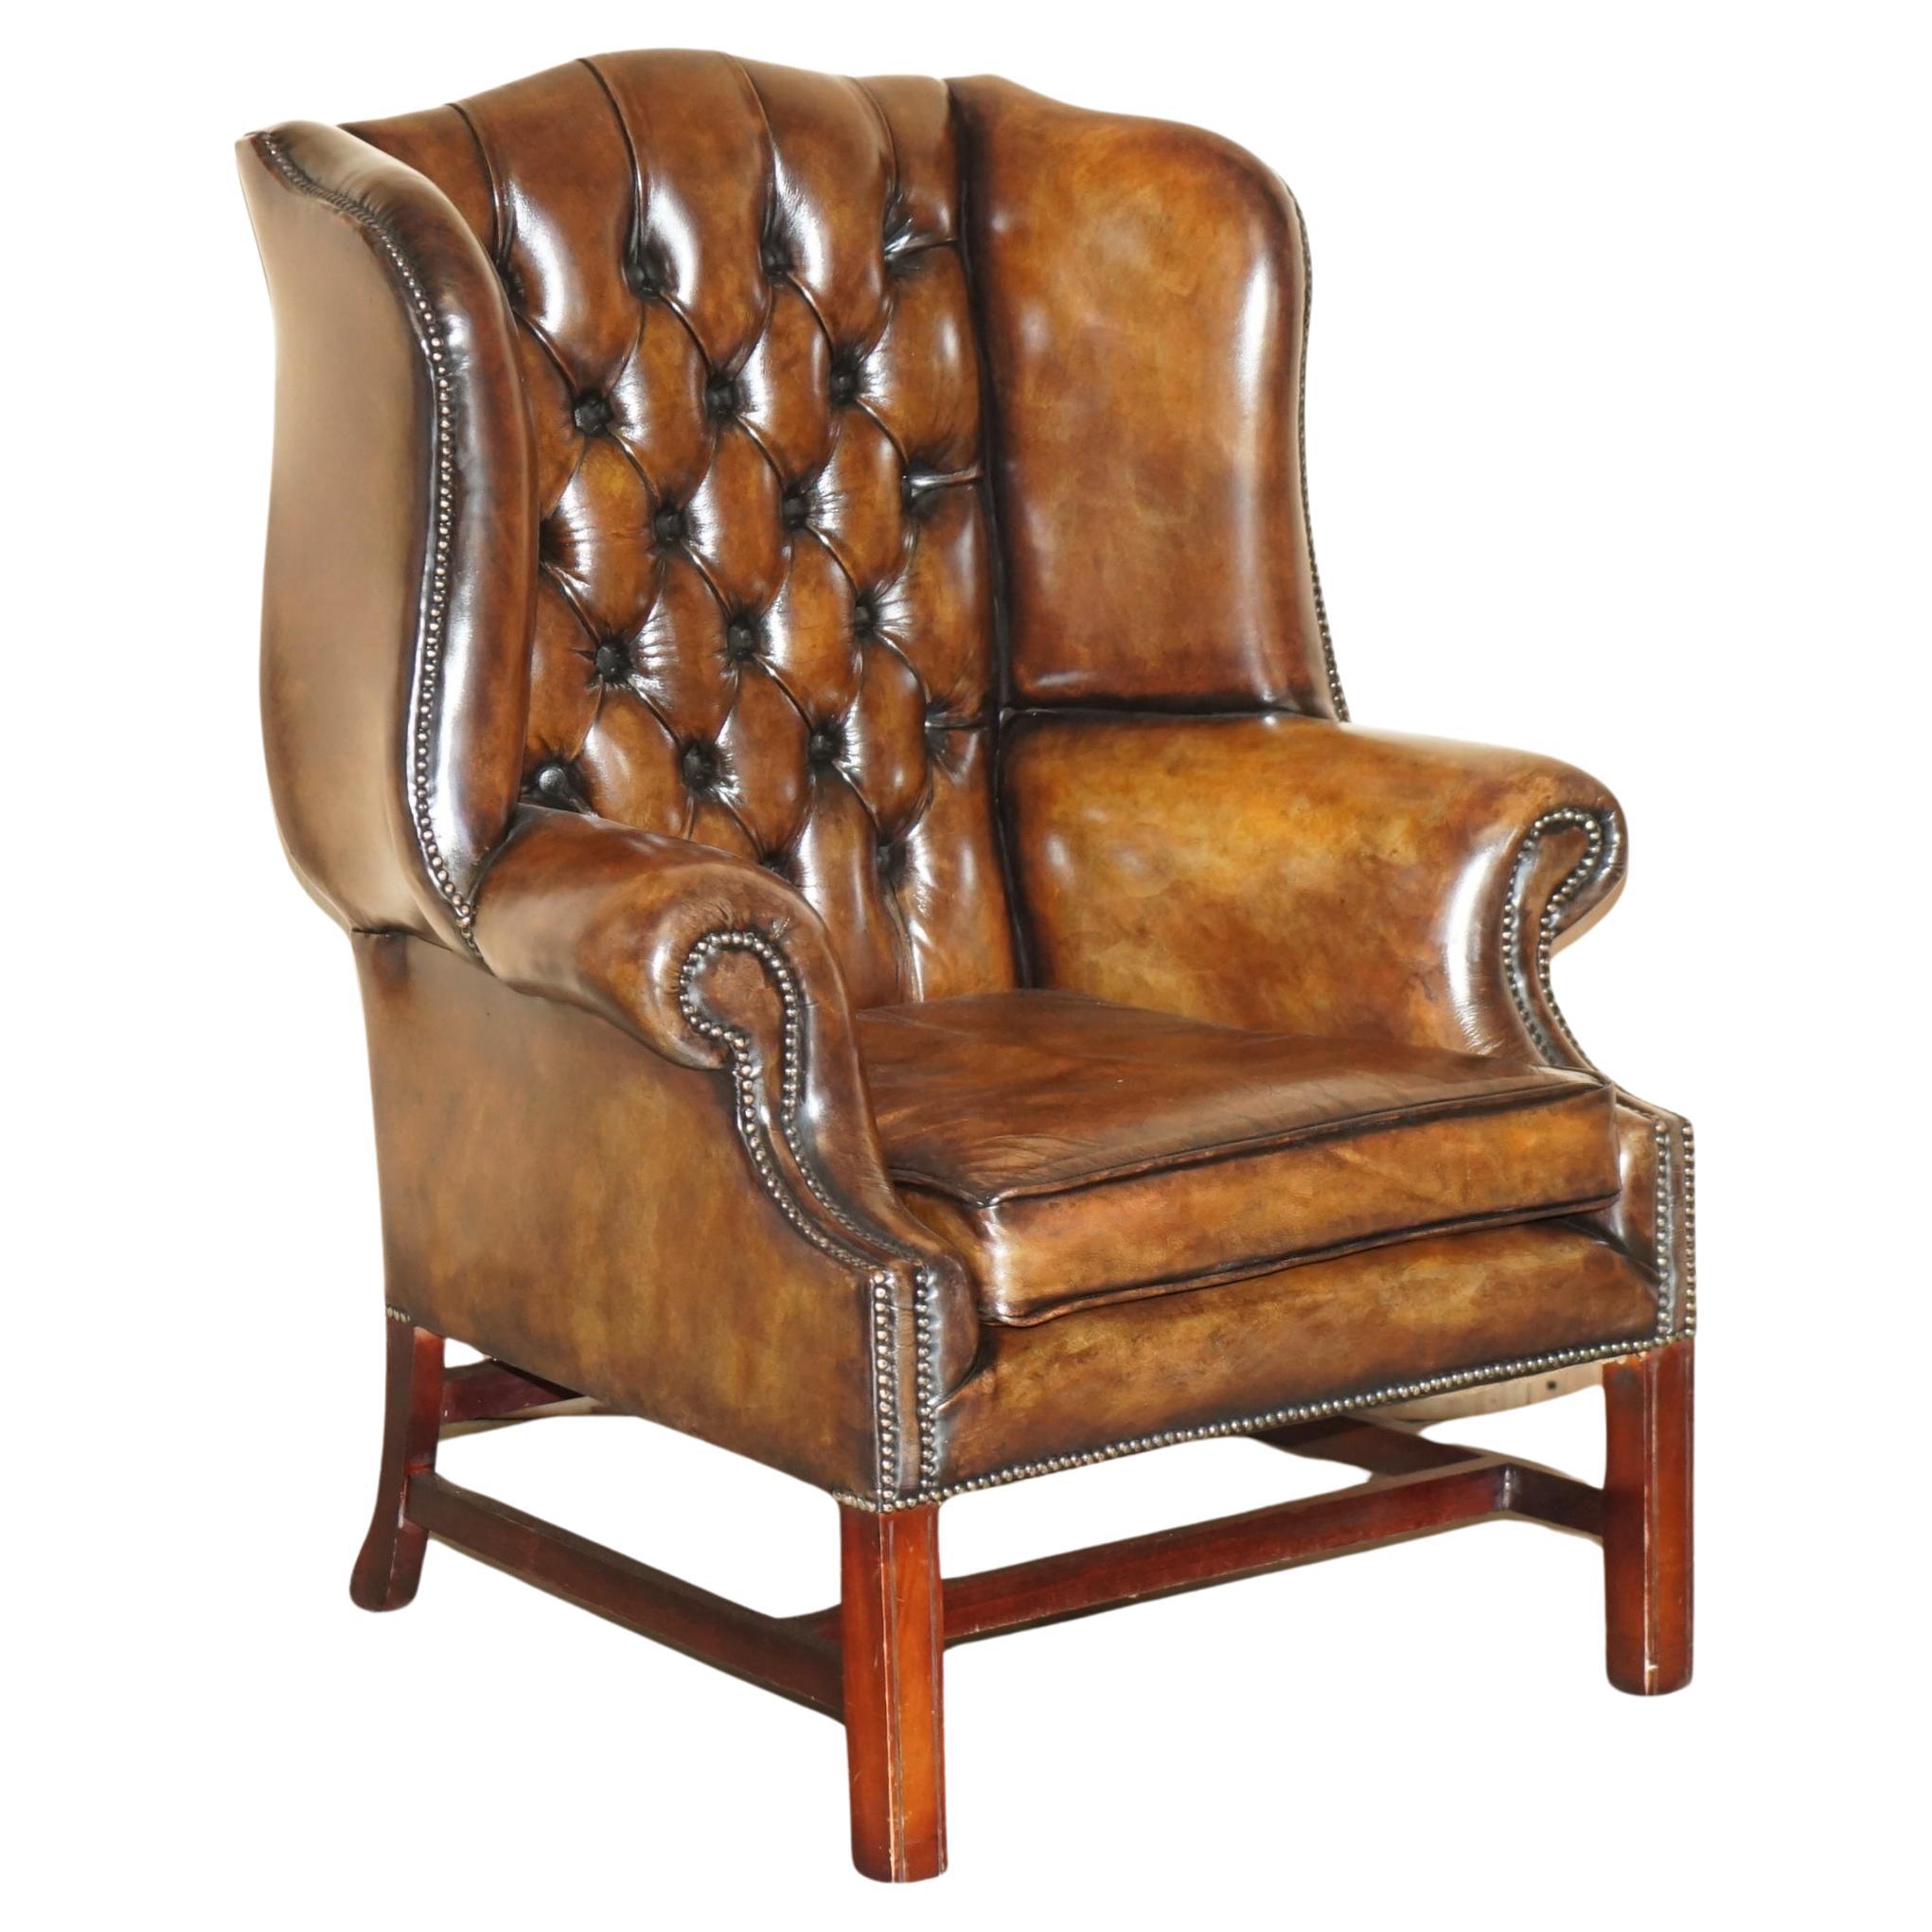 COMFORTABLE ViNTAGE RESTORED BROWN LEATHER TUFTED CHESTERFIELD WINGBACK ARMCHAIR im Angebot